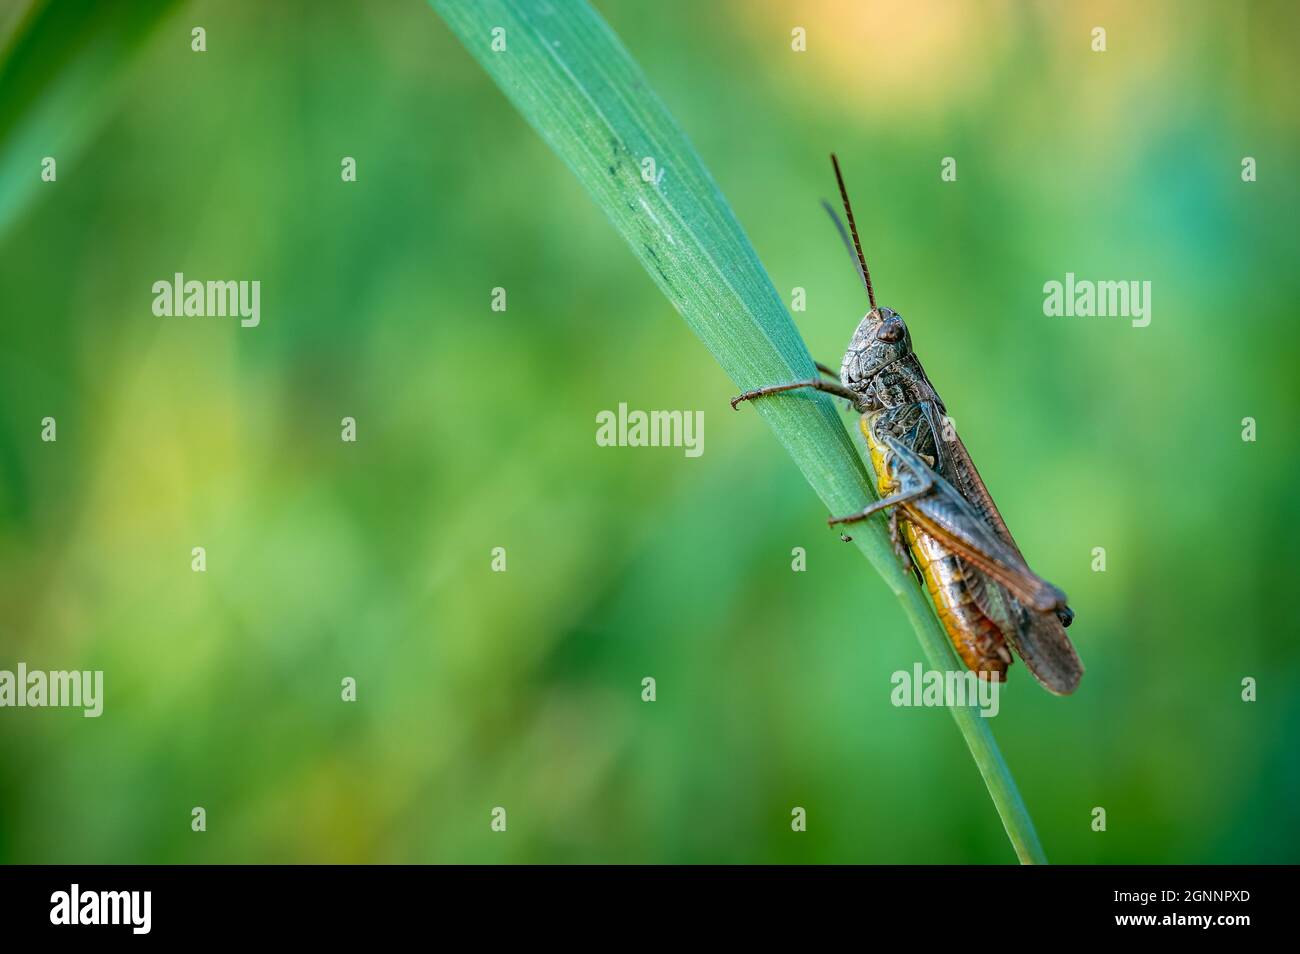 Macro shot of a brown grasshopper. Shallow depth of field. Grasshopper sitting on blade of grass. Green soft background. Stock Photo